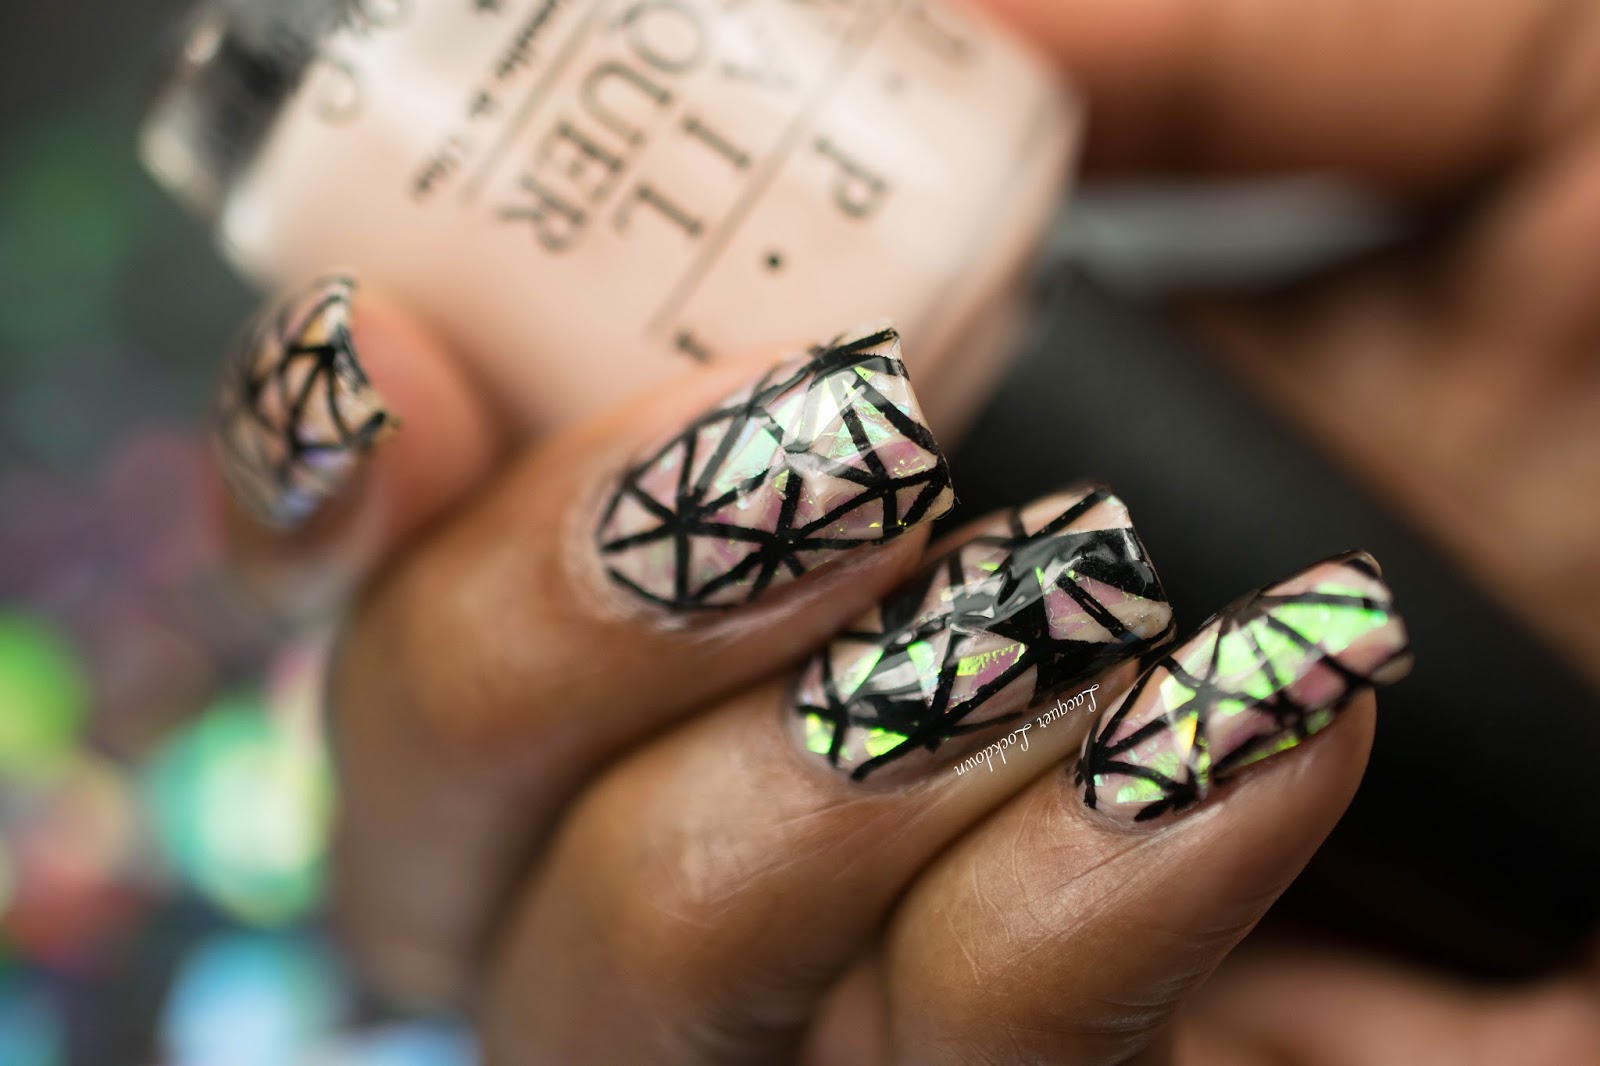 8. 15 Glass Nail Art Designs That Will Take Your Nails to the Next Level - wide 5